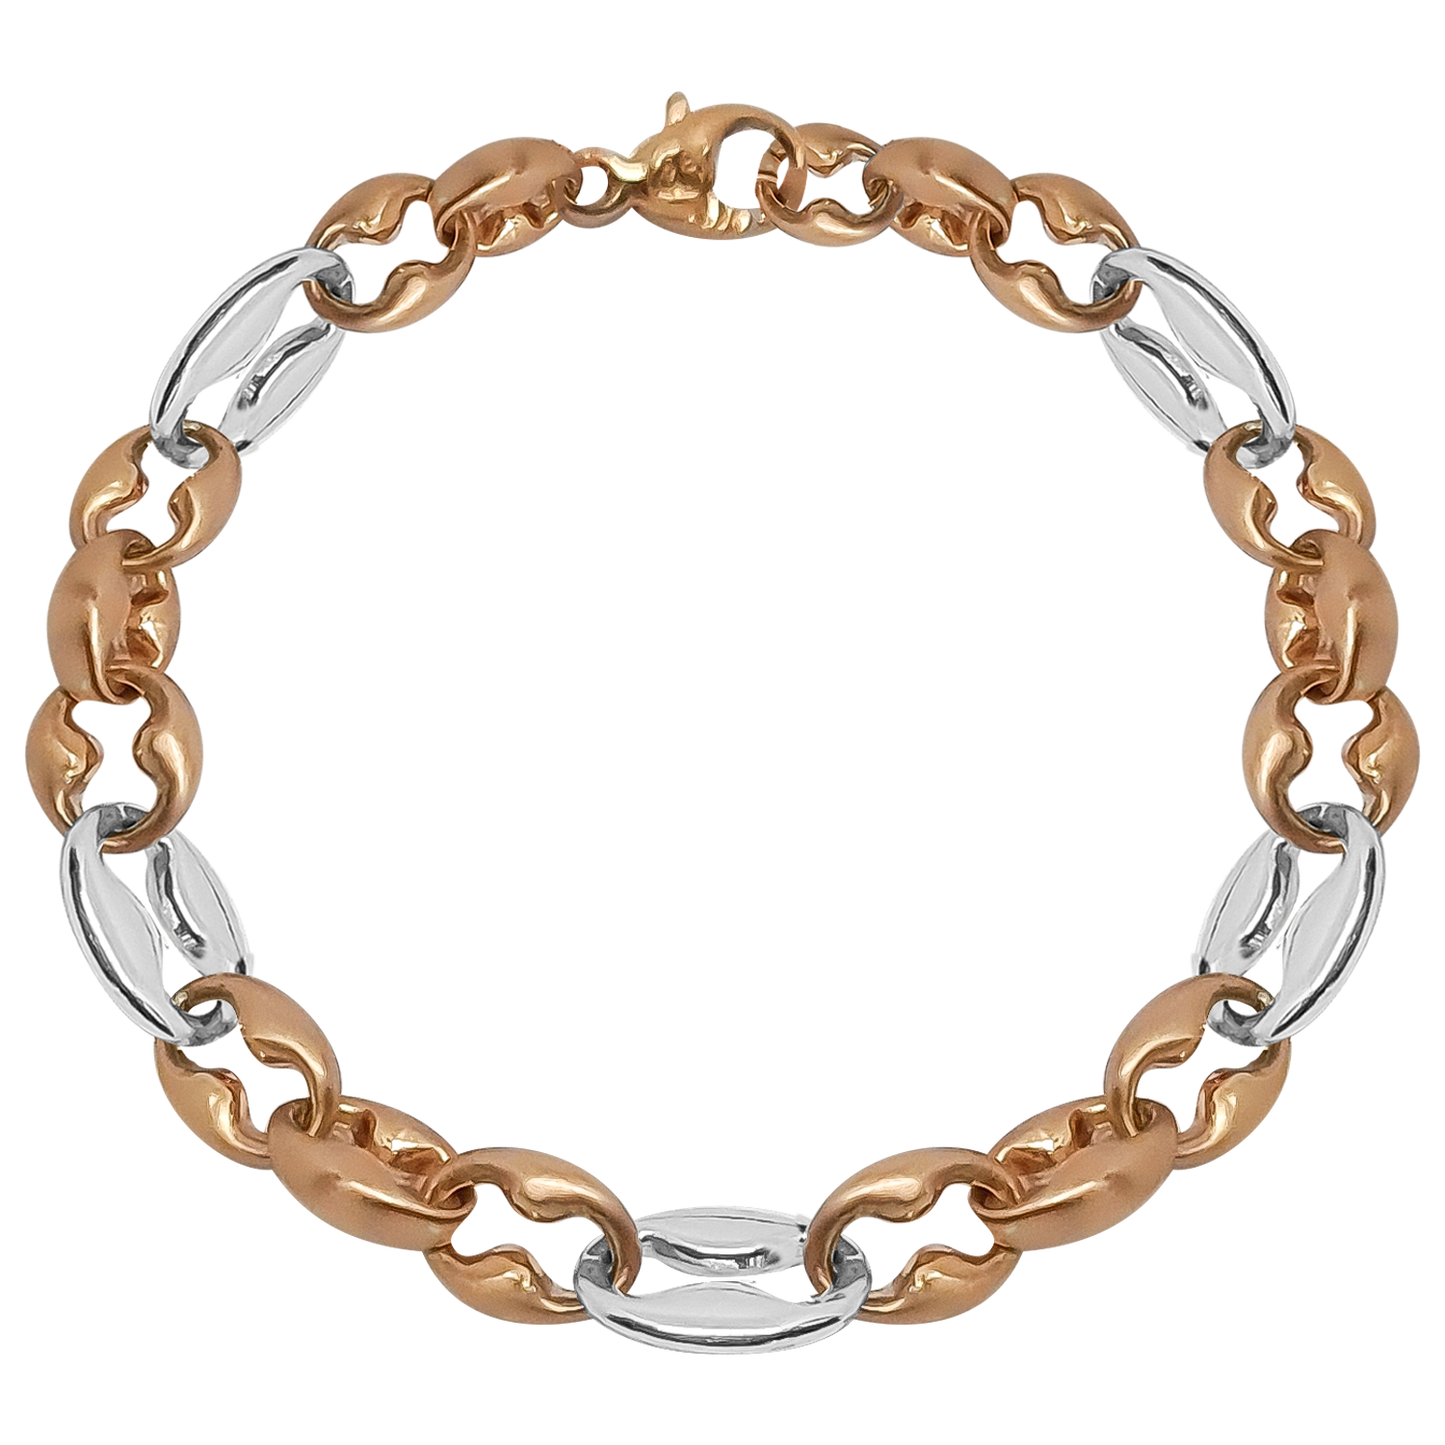 Two-tone mat and gloss Gucci Link Bracelet in 9ct Two-Tone Gold.